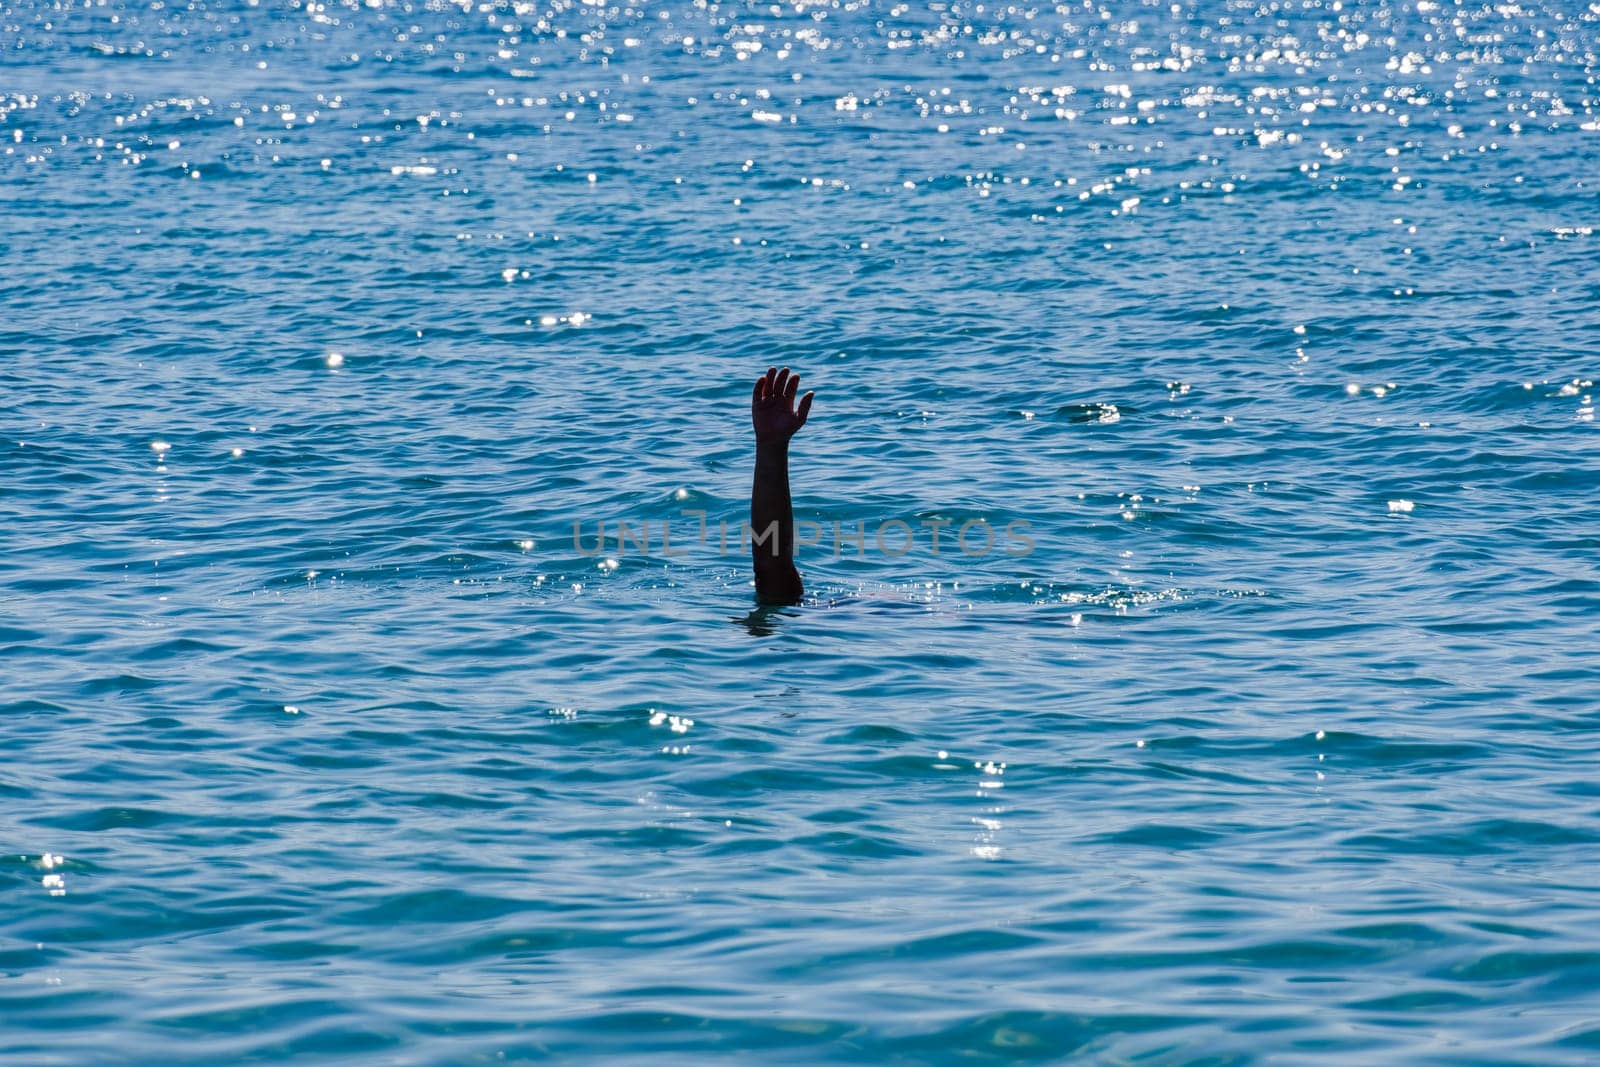 Drowning man concept, with a male raised hand with an open palm visible waving for help above a blue sea with low waves.